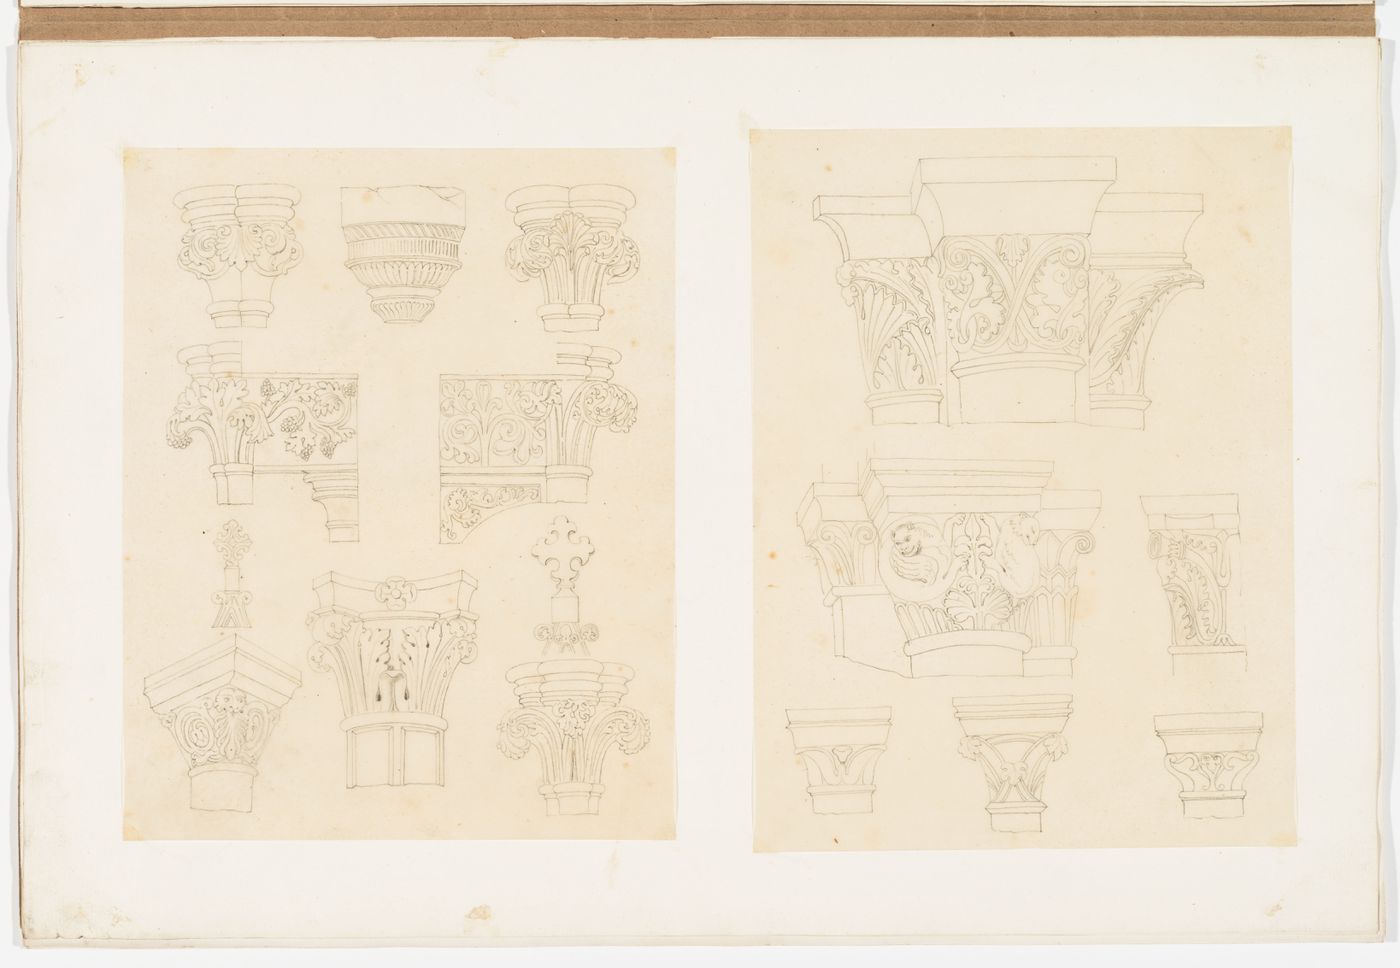 Two drawings of Gothic architectural elements: capitals, compound piers, and finials